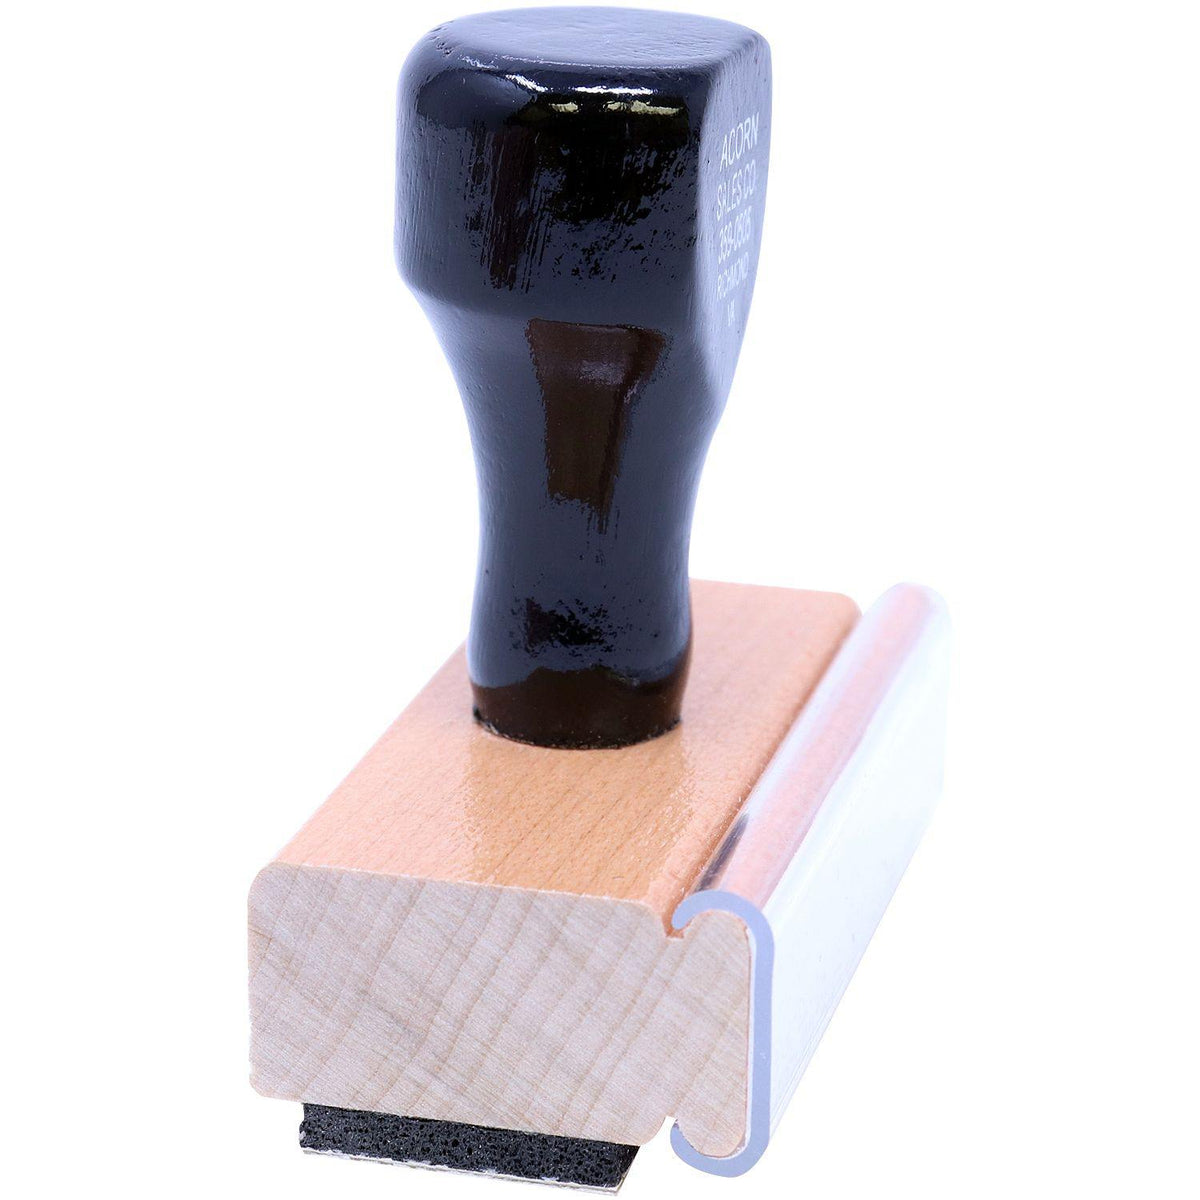 Side View of Unofficial Transcript Rubber Stamp at an Angle